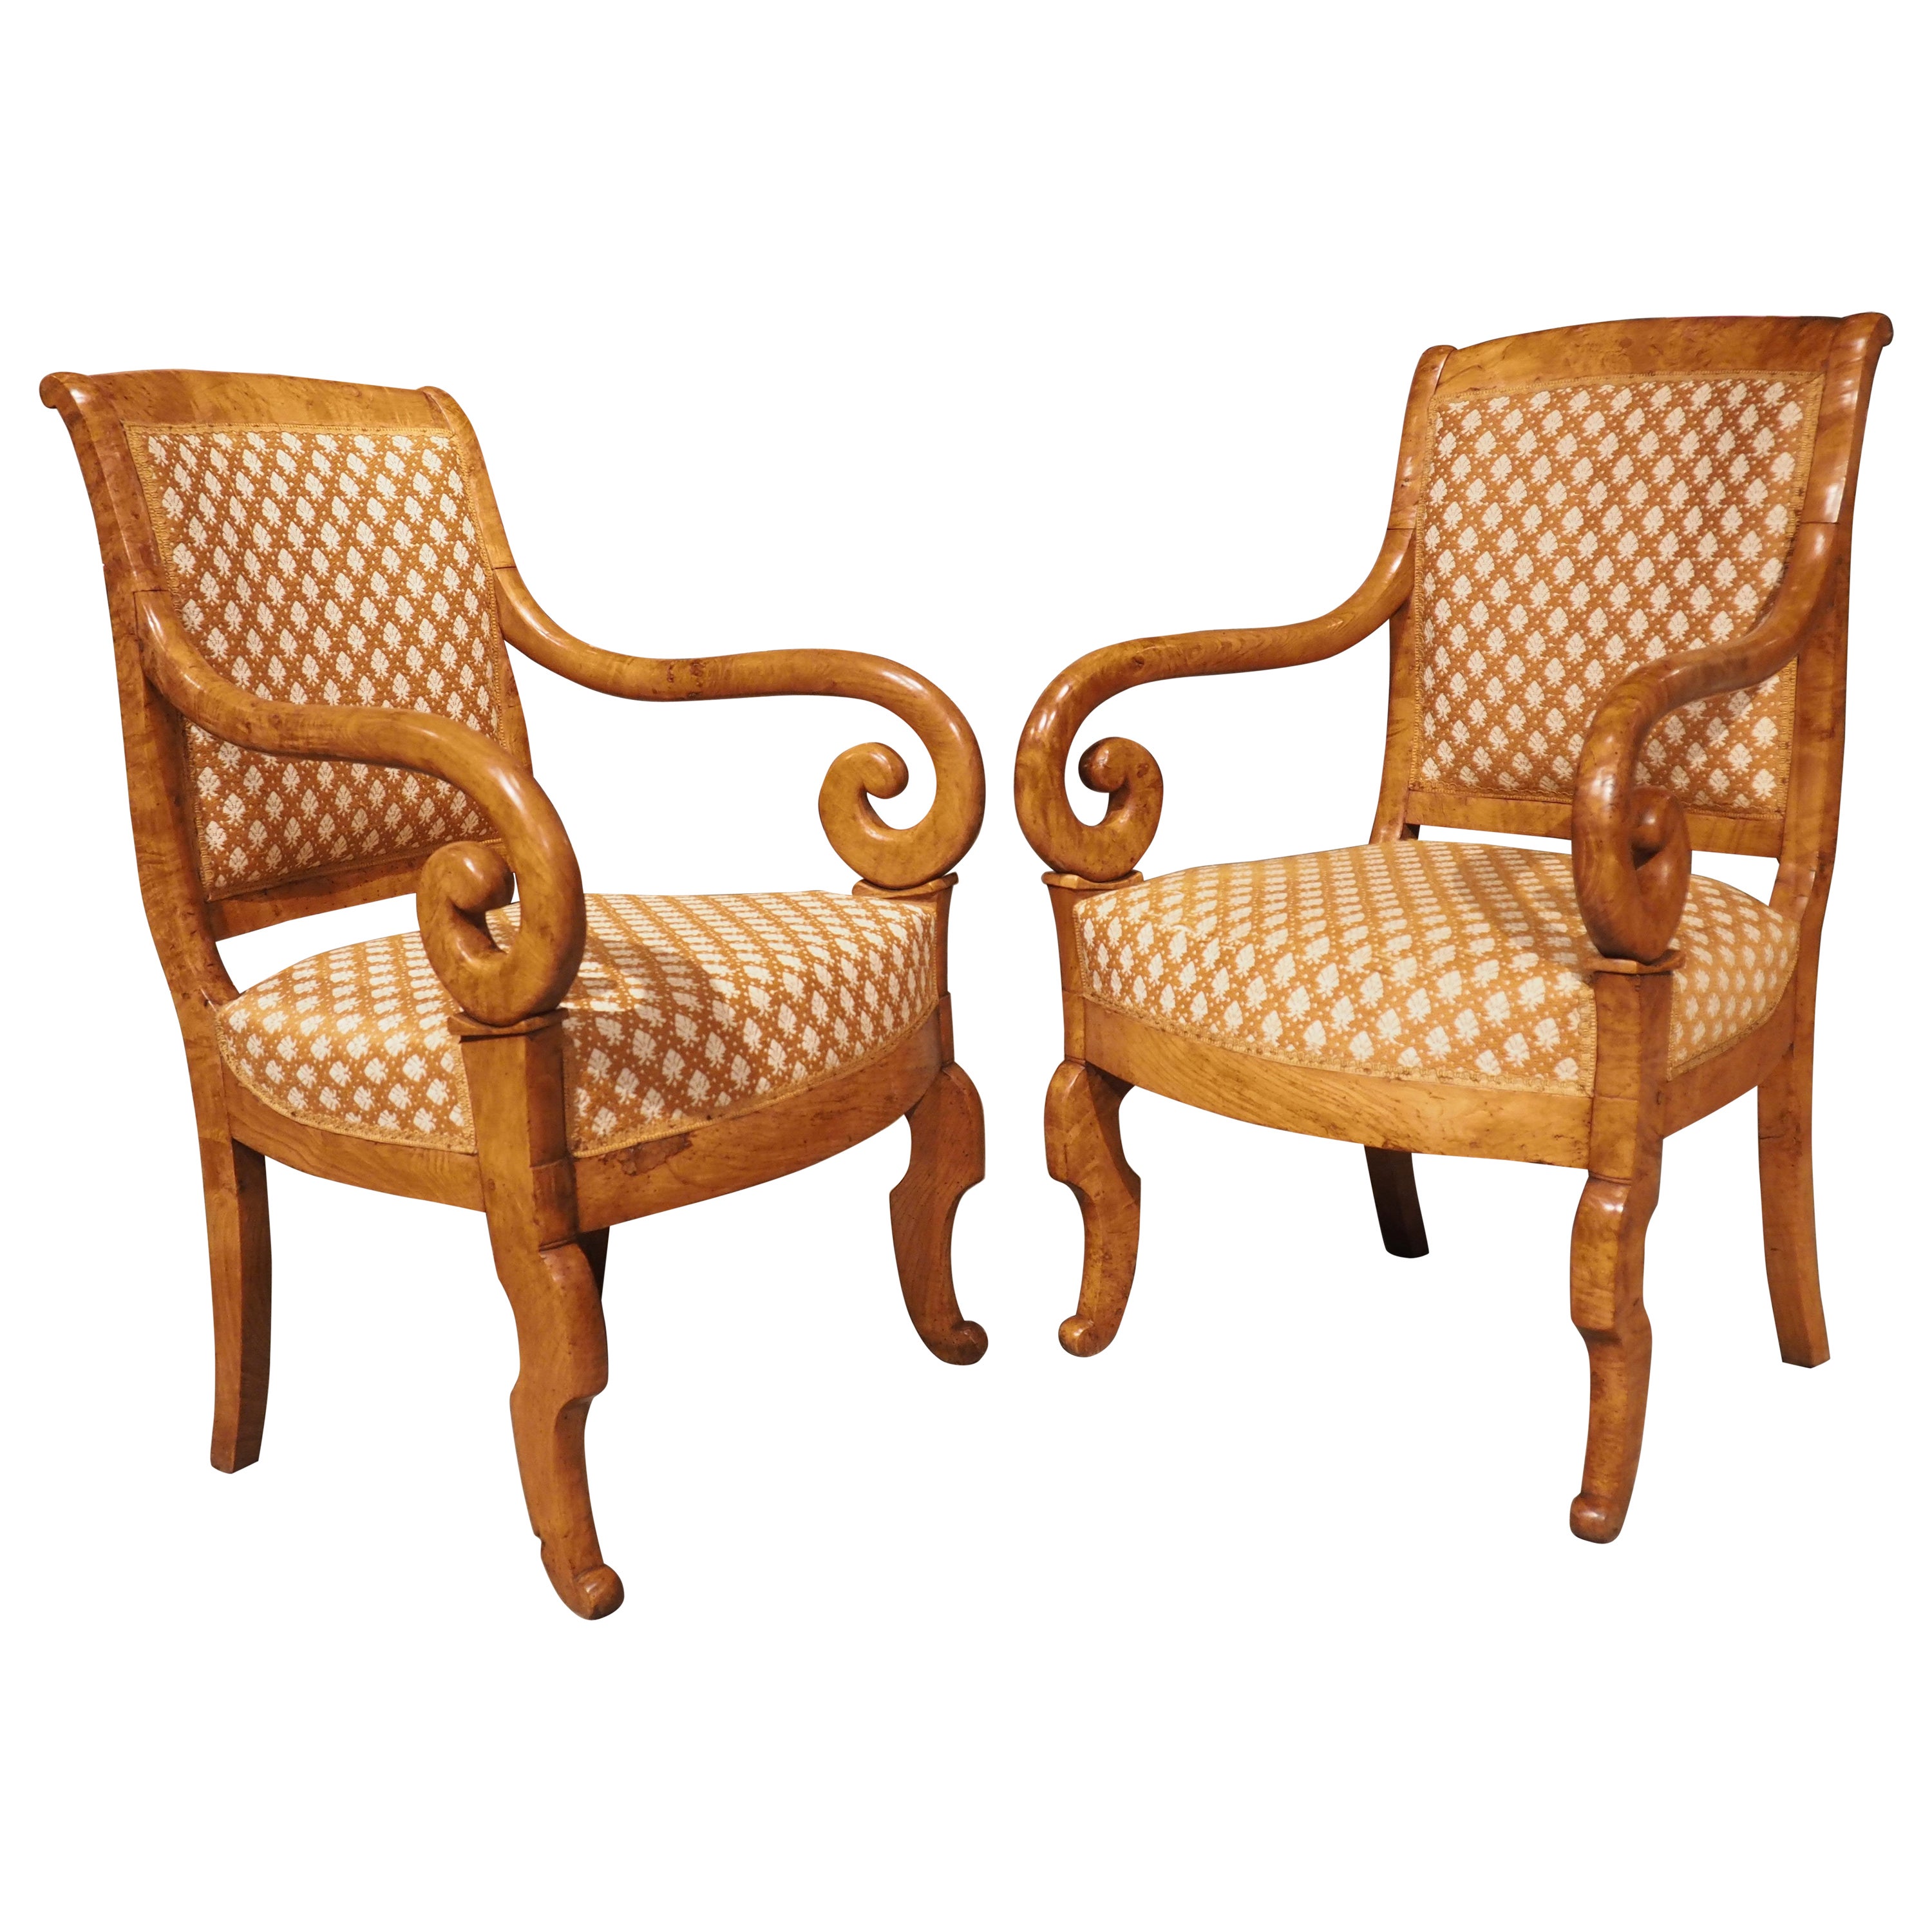 Pair of Antique French Elmwood Louis Philippe Armchairs, Circa 1840 For Sale